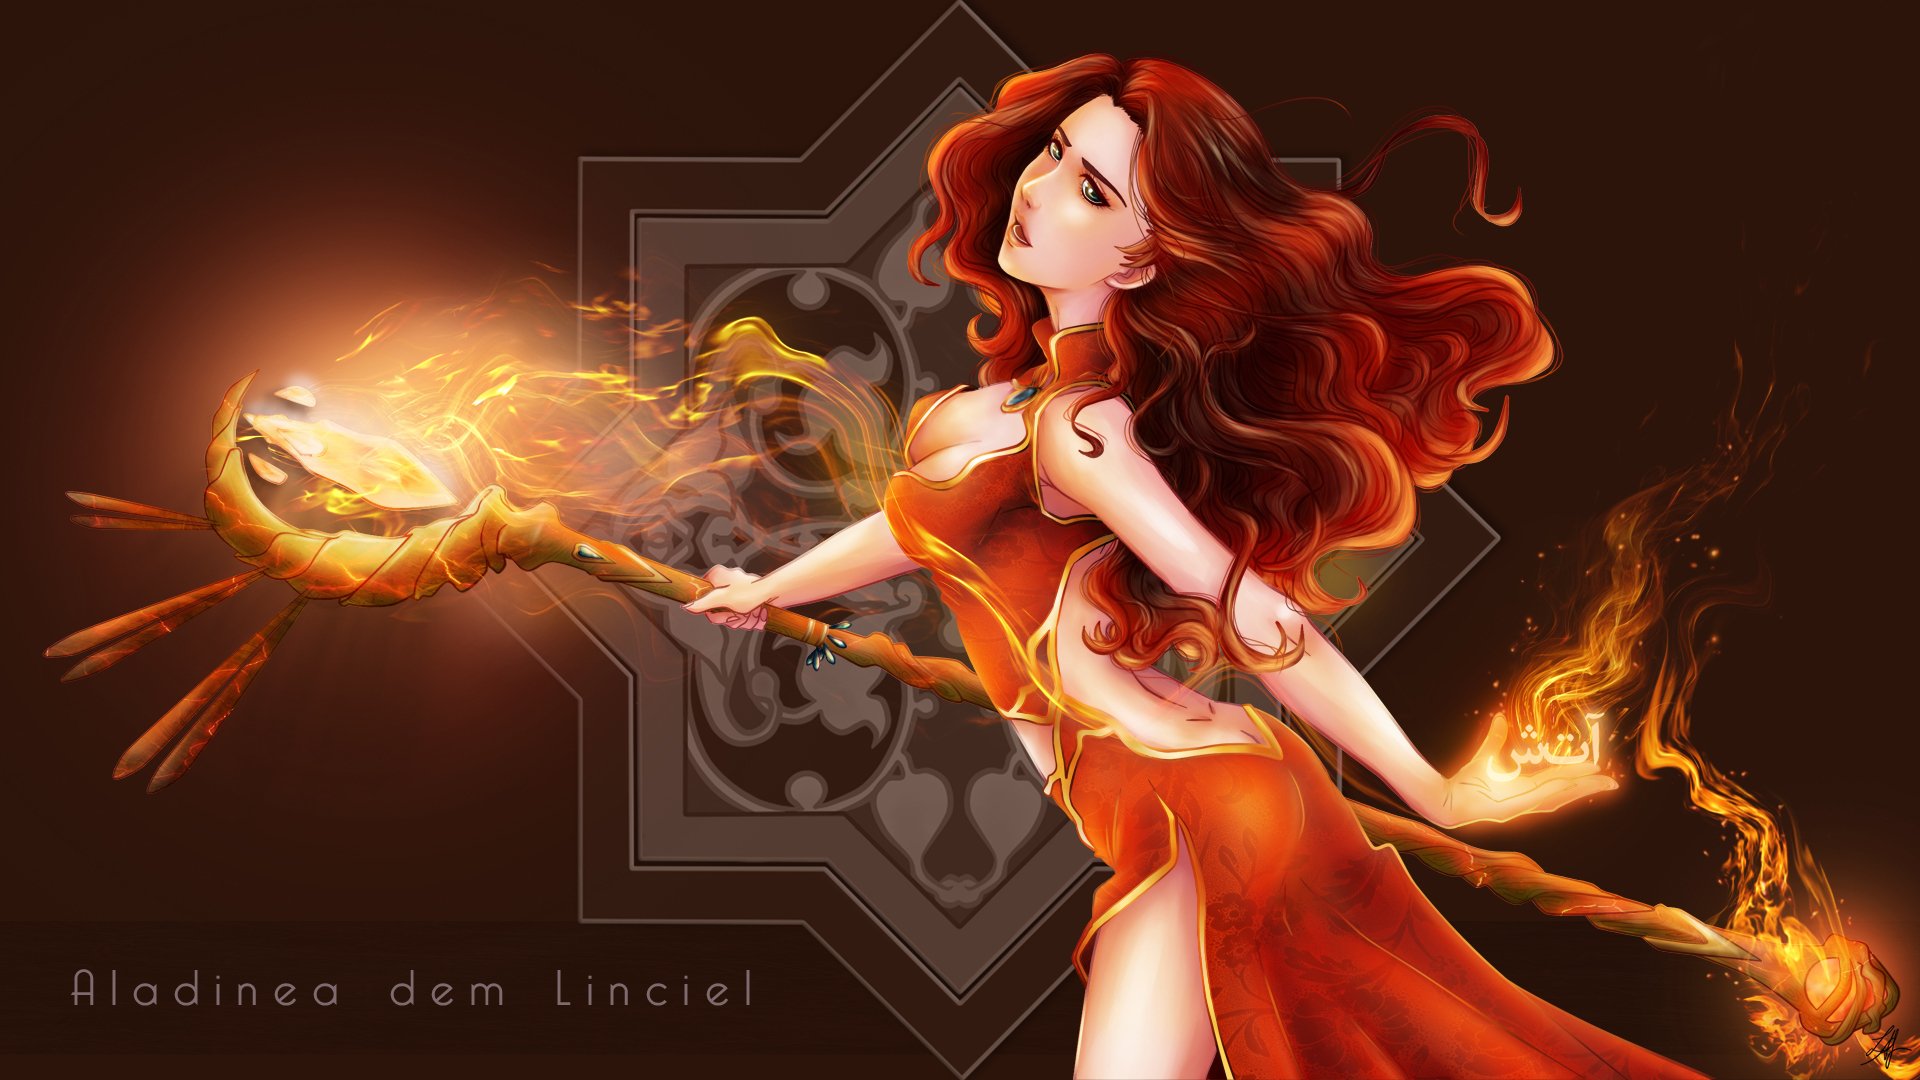 magic, Fire, Mage, Staff, Redhead, Girl, Fantasy, Girls Wallpaper HD / Desktop and Mobile Background